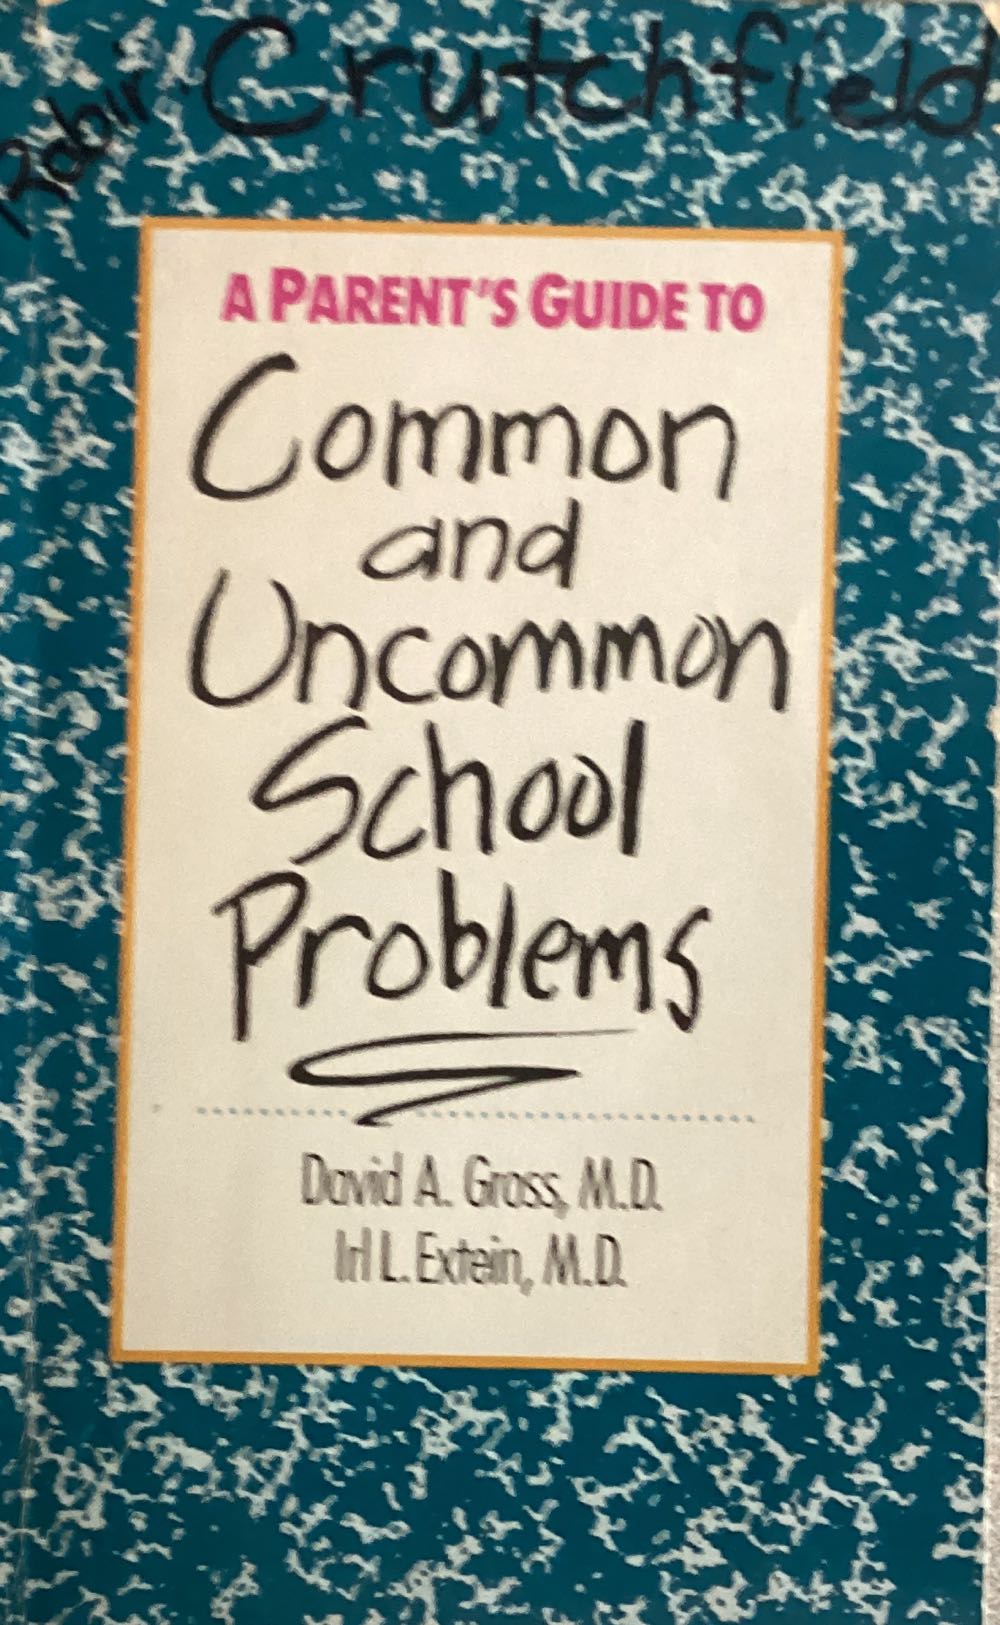 Common And Uncommon School Problems - David A. Gross, M.D. book collectible - Main Image 1